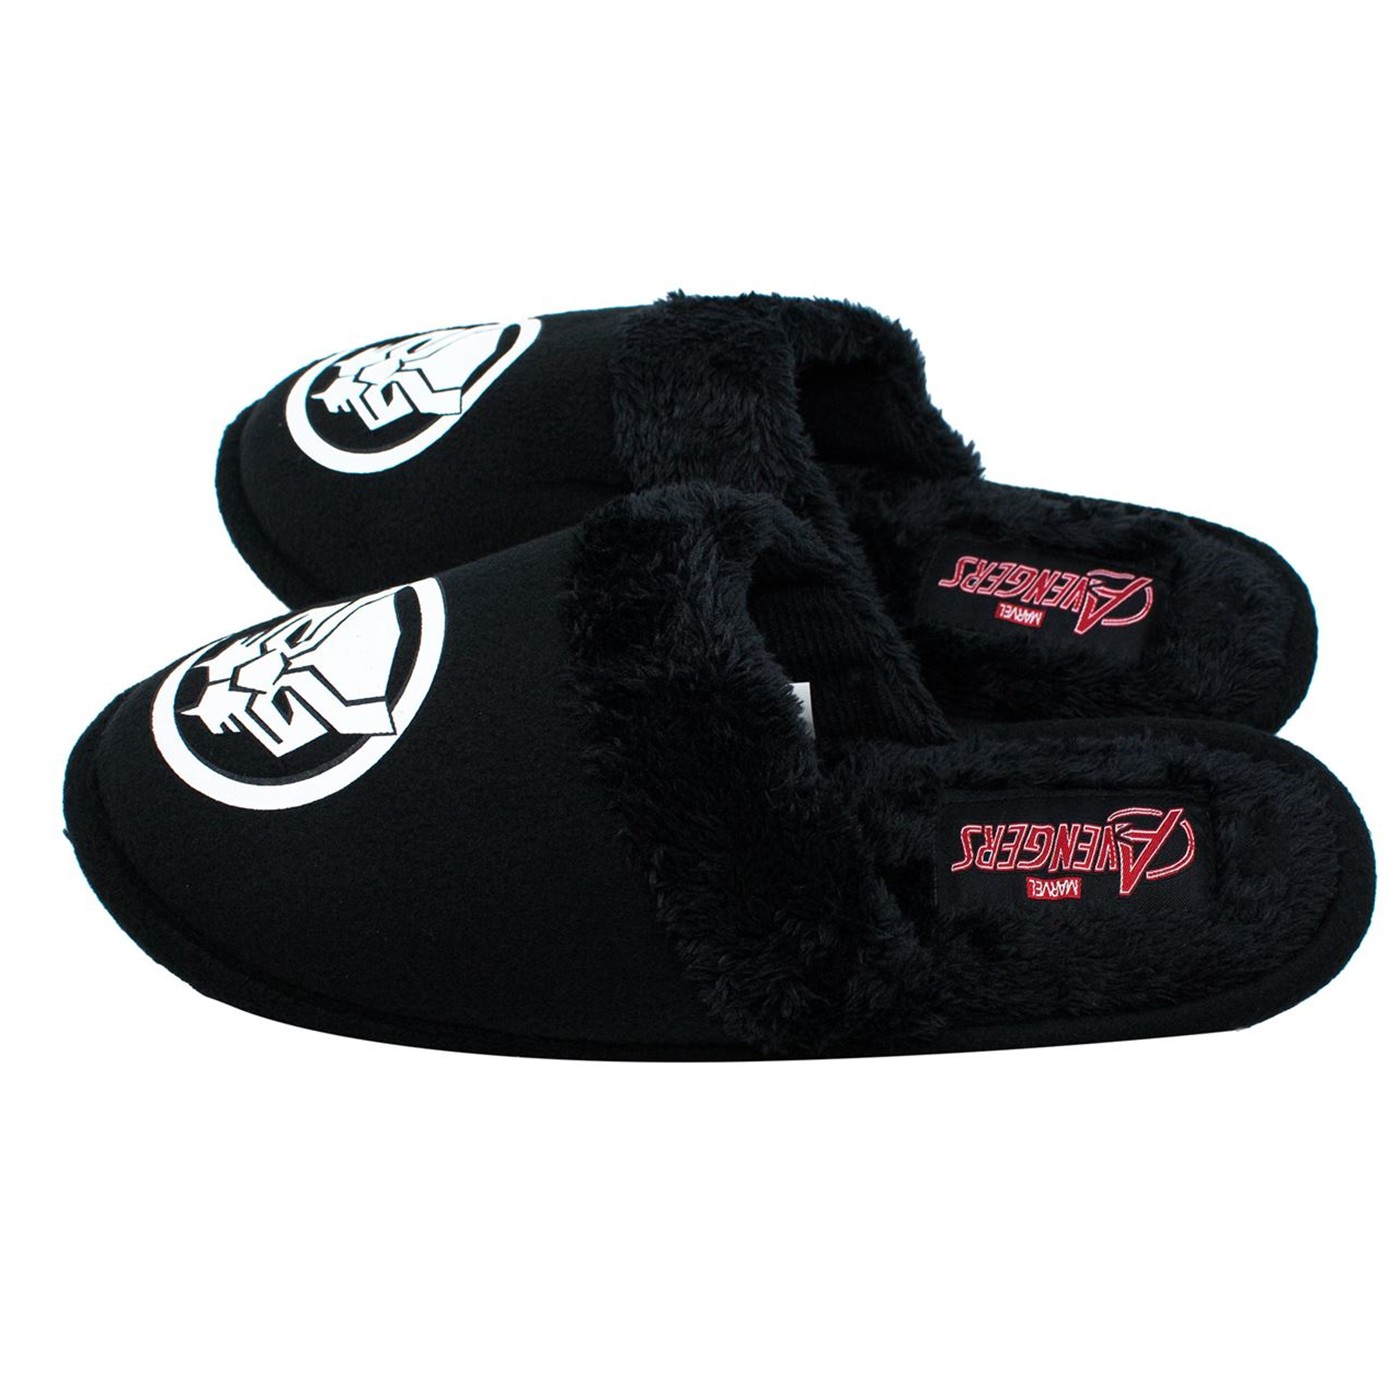 Black Panther Character Men's Slippers